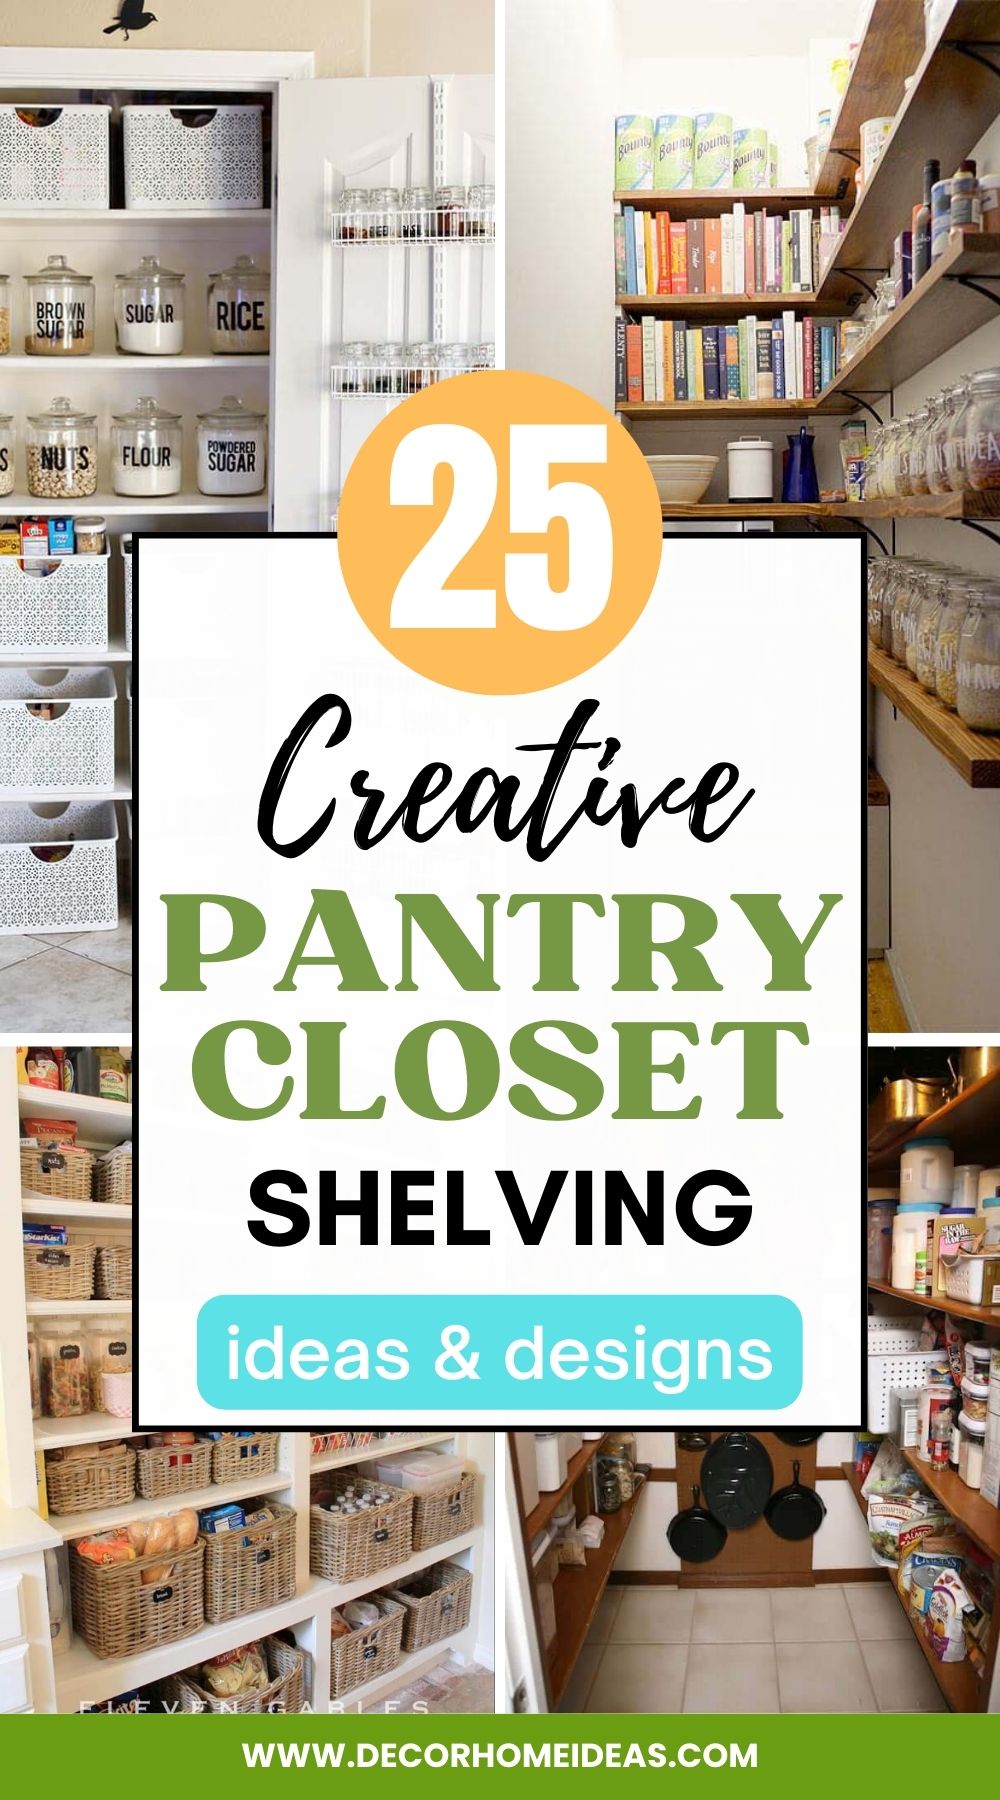 Get organized and maximize your pantry space with these brilliant pantry closet shelving ideas! Discover innovative solutions for creating functional and stylish storage in your pantry, from adjustable shelves to pull-out drawers and more, to keep your kitchen essentials tidy and easily accessible.